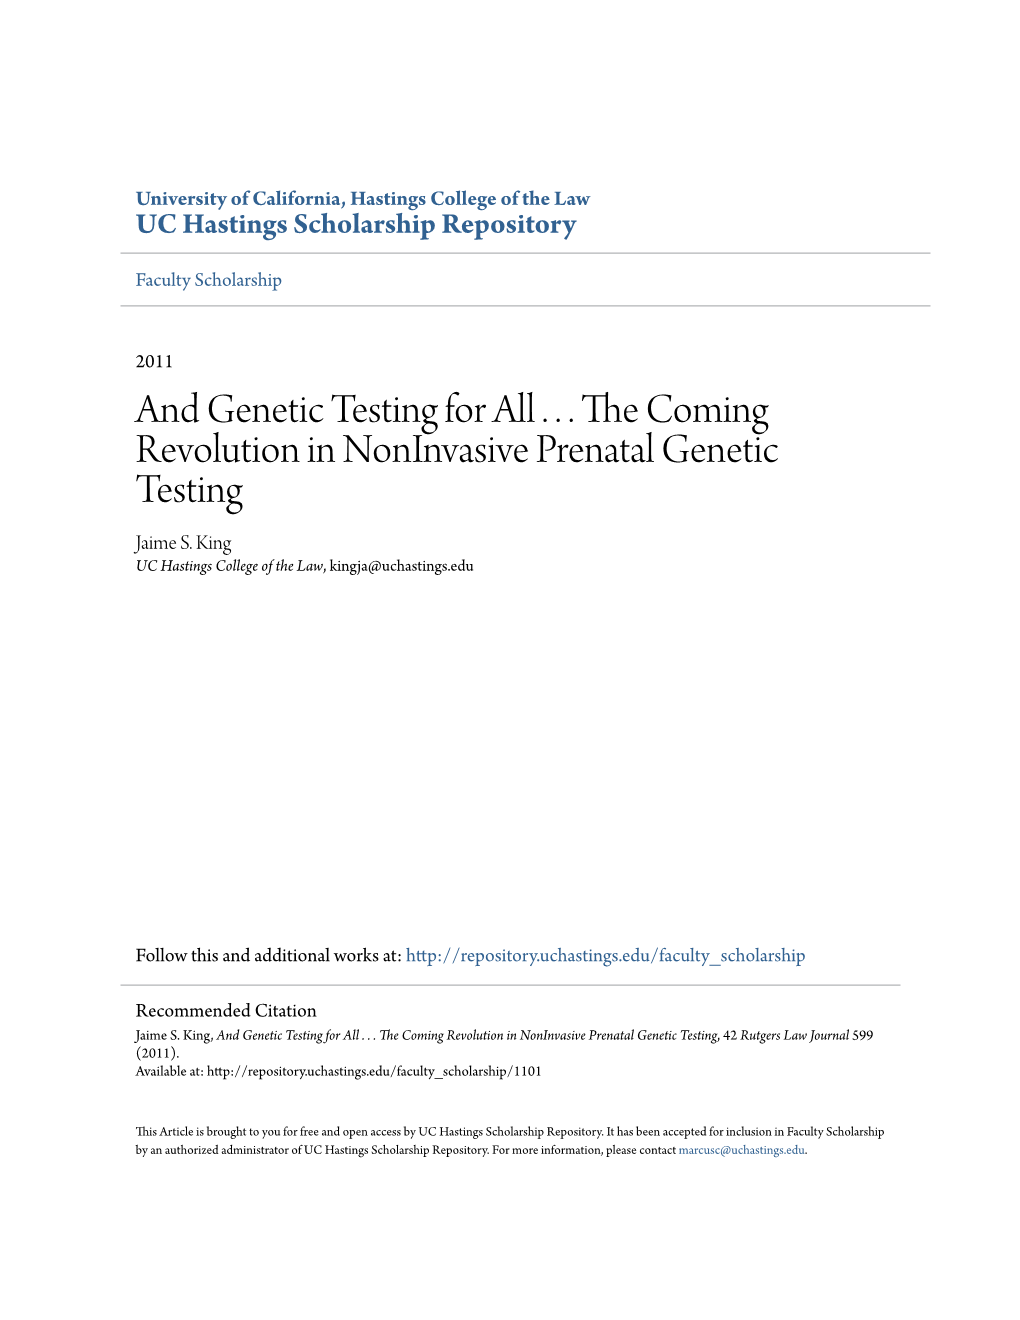 And Genetic Testing for All . . . the Coming Revolution in Noninvasive Prenatal Genetic Testing, 42 Rutgers Law Journal 599 (2011)